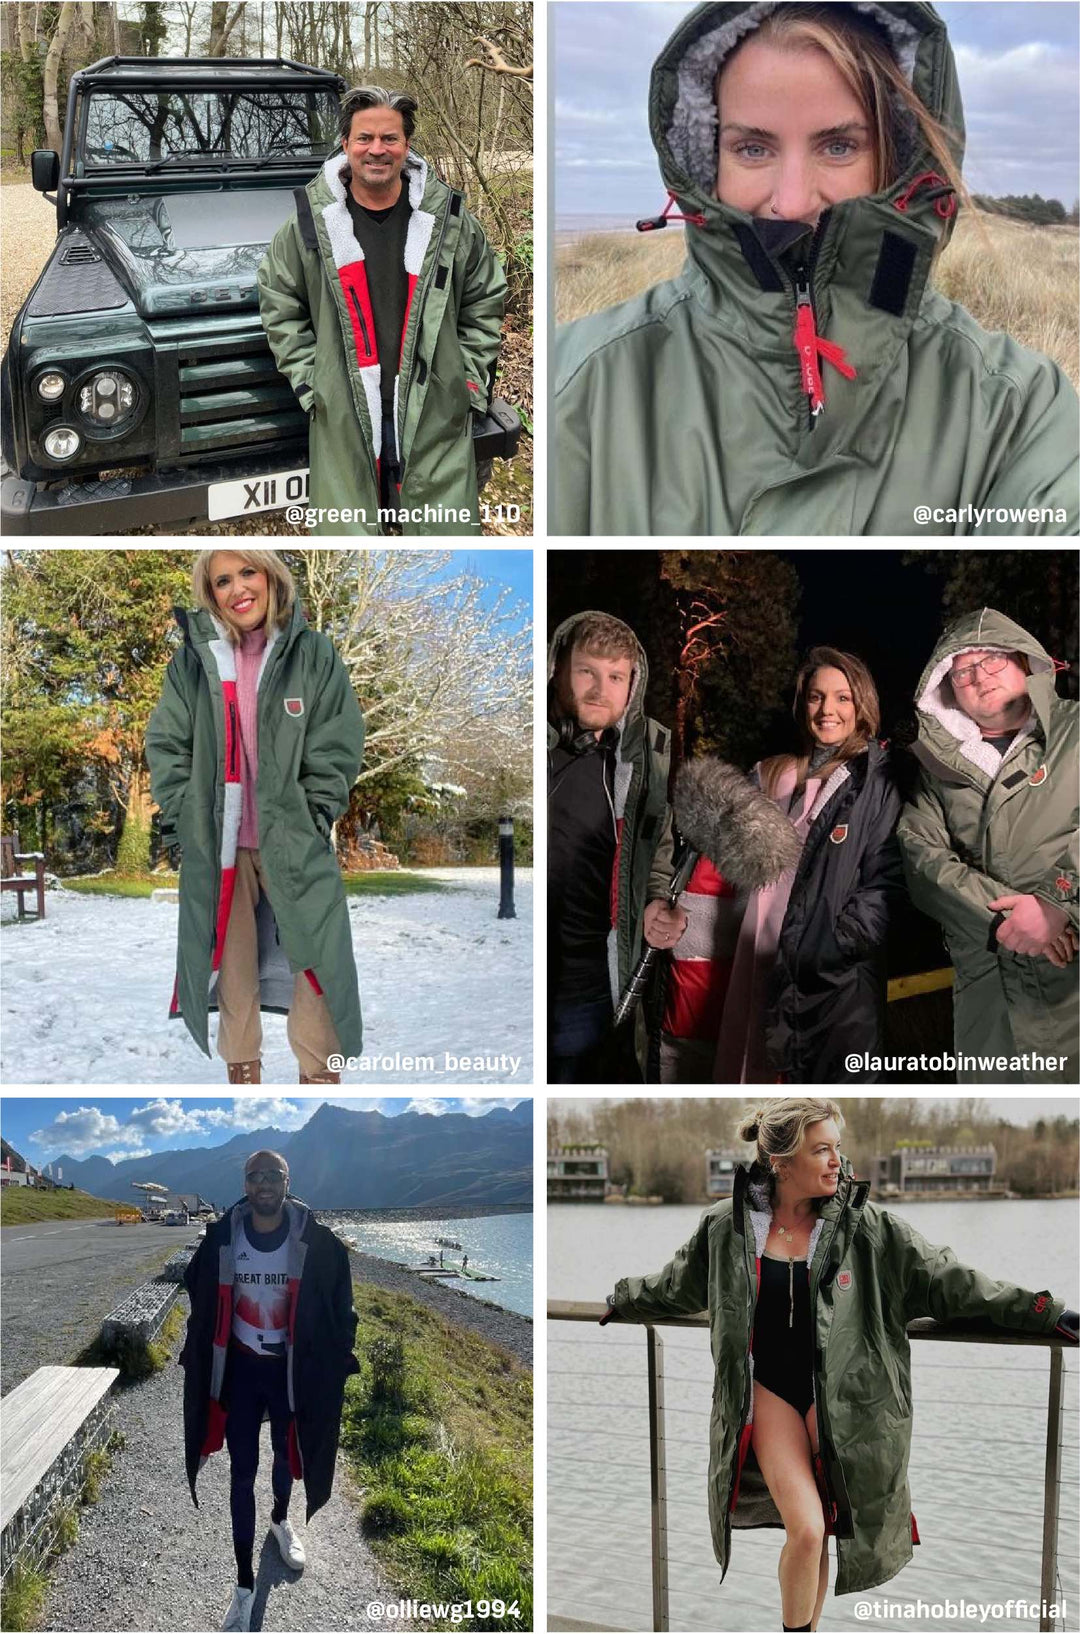 This image showcases six different uses of the Beaufort Robe by D-Robe. You can utilize it as a dry robe after a swim, as a raincoat during Spring showers, as a parka during colder months, or even style it as an oversized outdoor robe. The versatility of the Beaufort Robe knows no bounds.